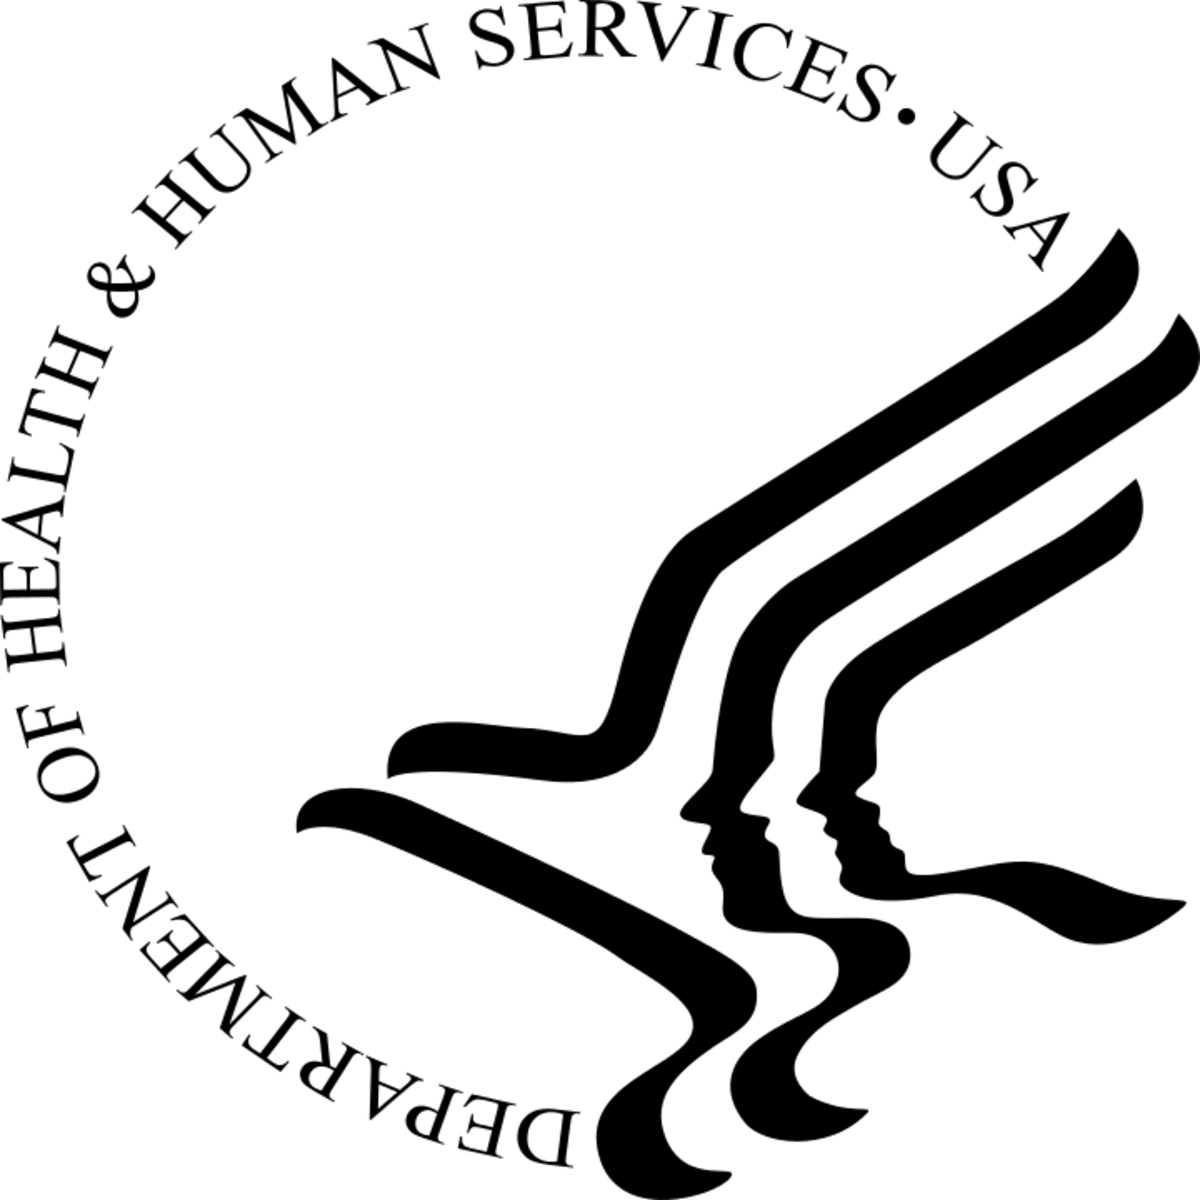 department of human services